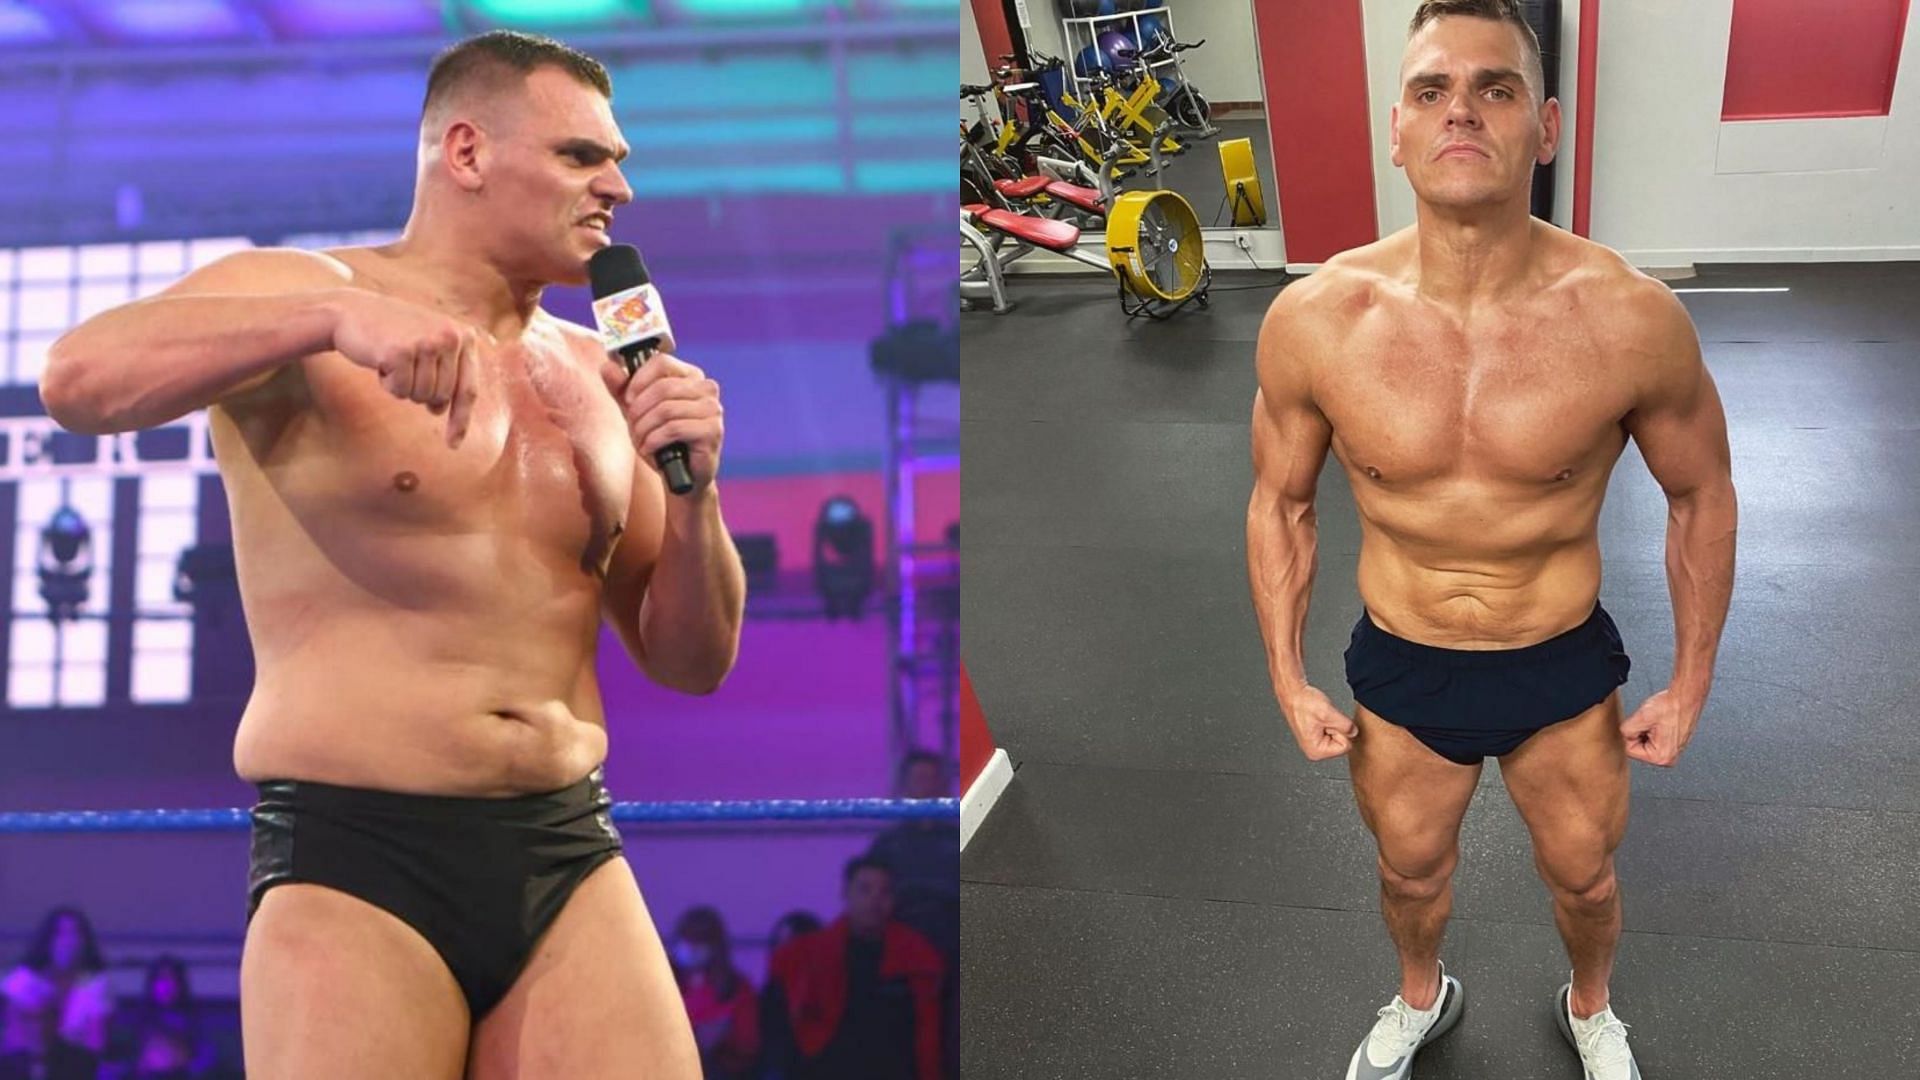 Gunther lost more than 60 lbs ahead of his main roster debut